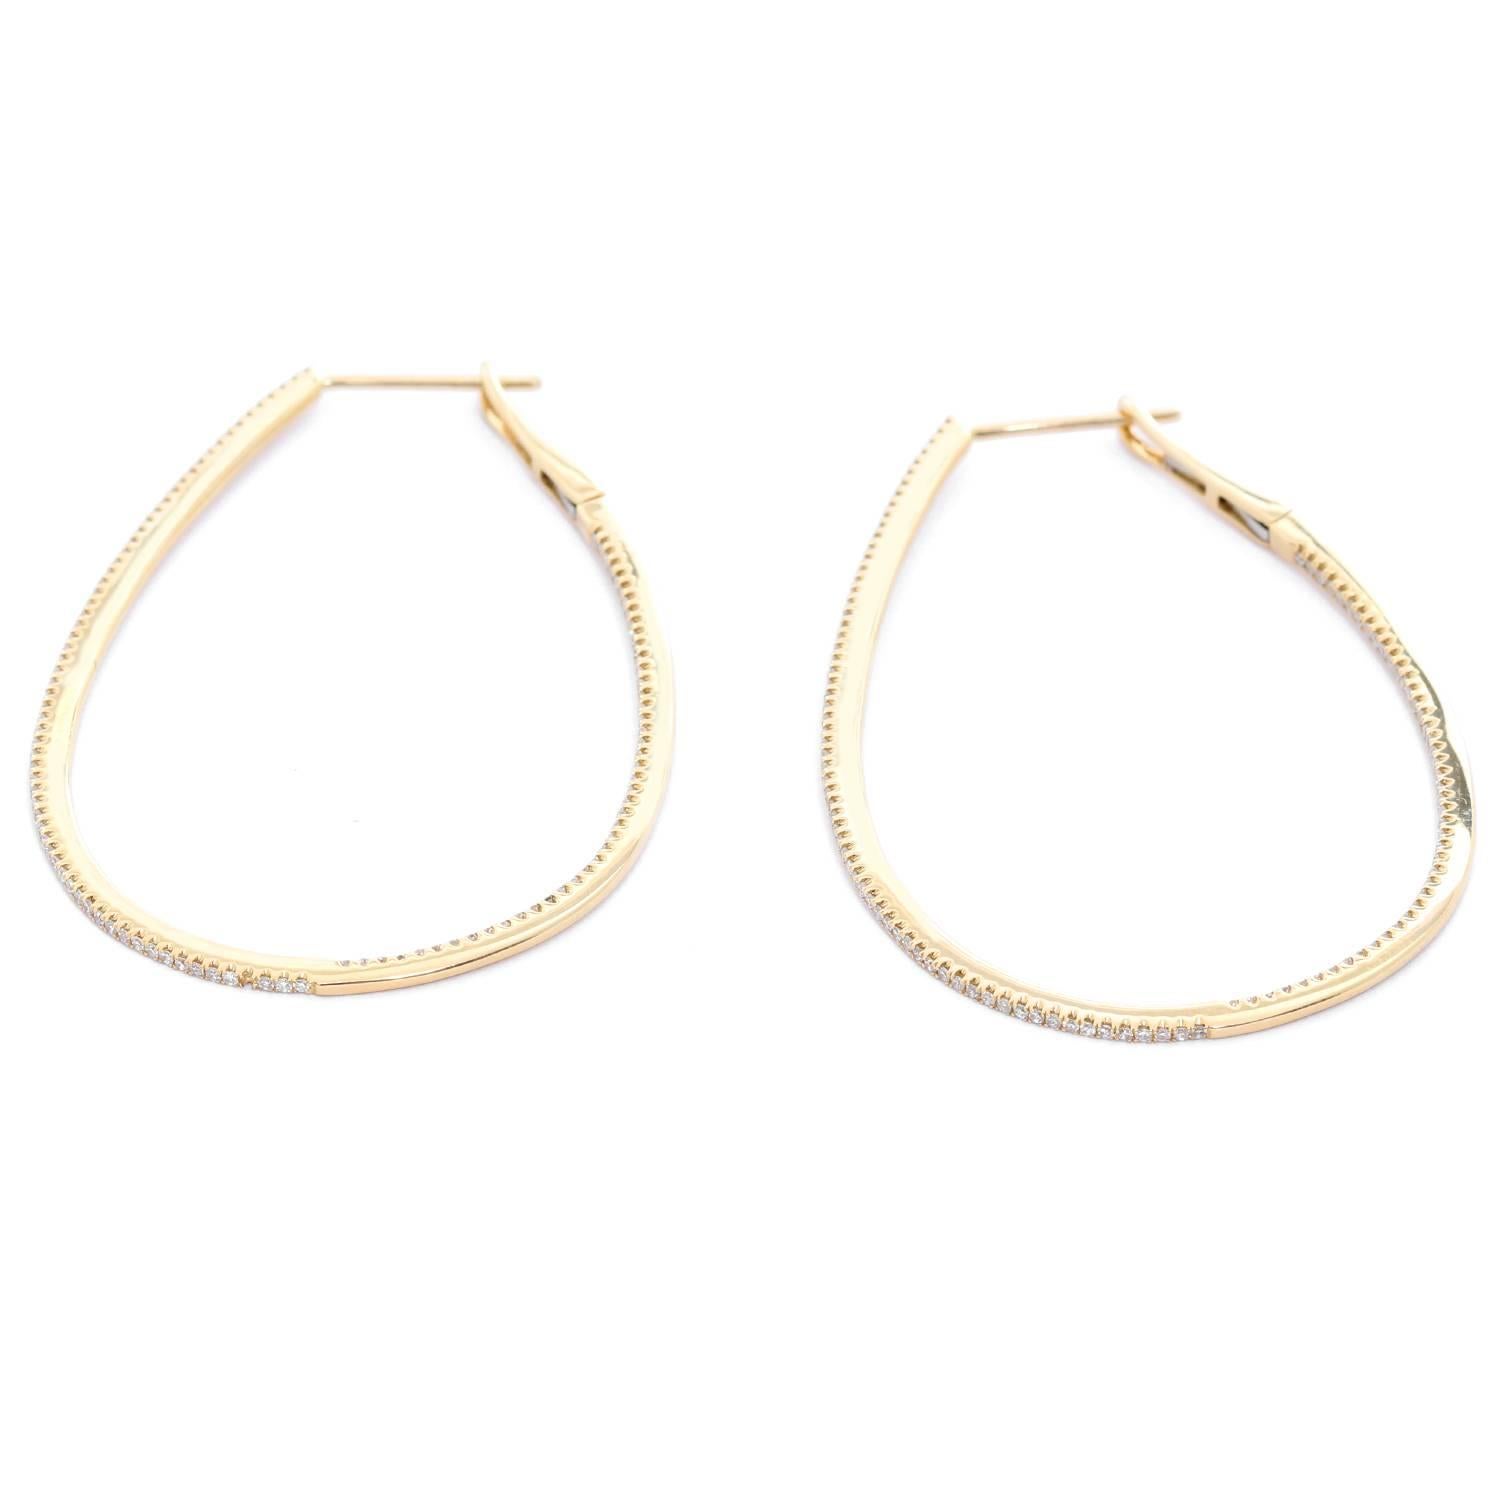 Stunning Tear Drop Inside-Out Diamond Hoops - . 14K Yellow Gold measuring 2 inches long with .65 cts diamonds along the diameter. Clarity SI- Color GH. Total weight 6.3 grams.